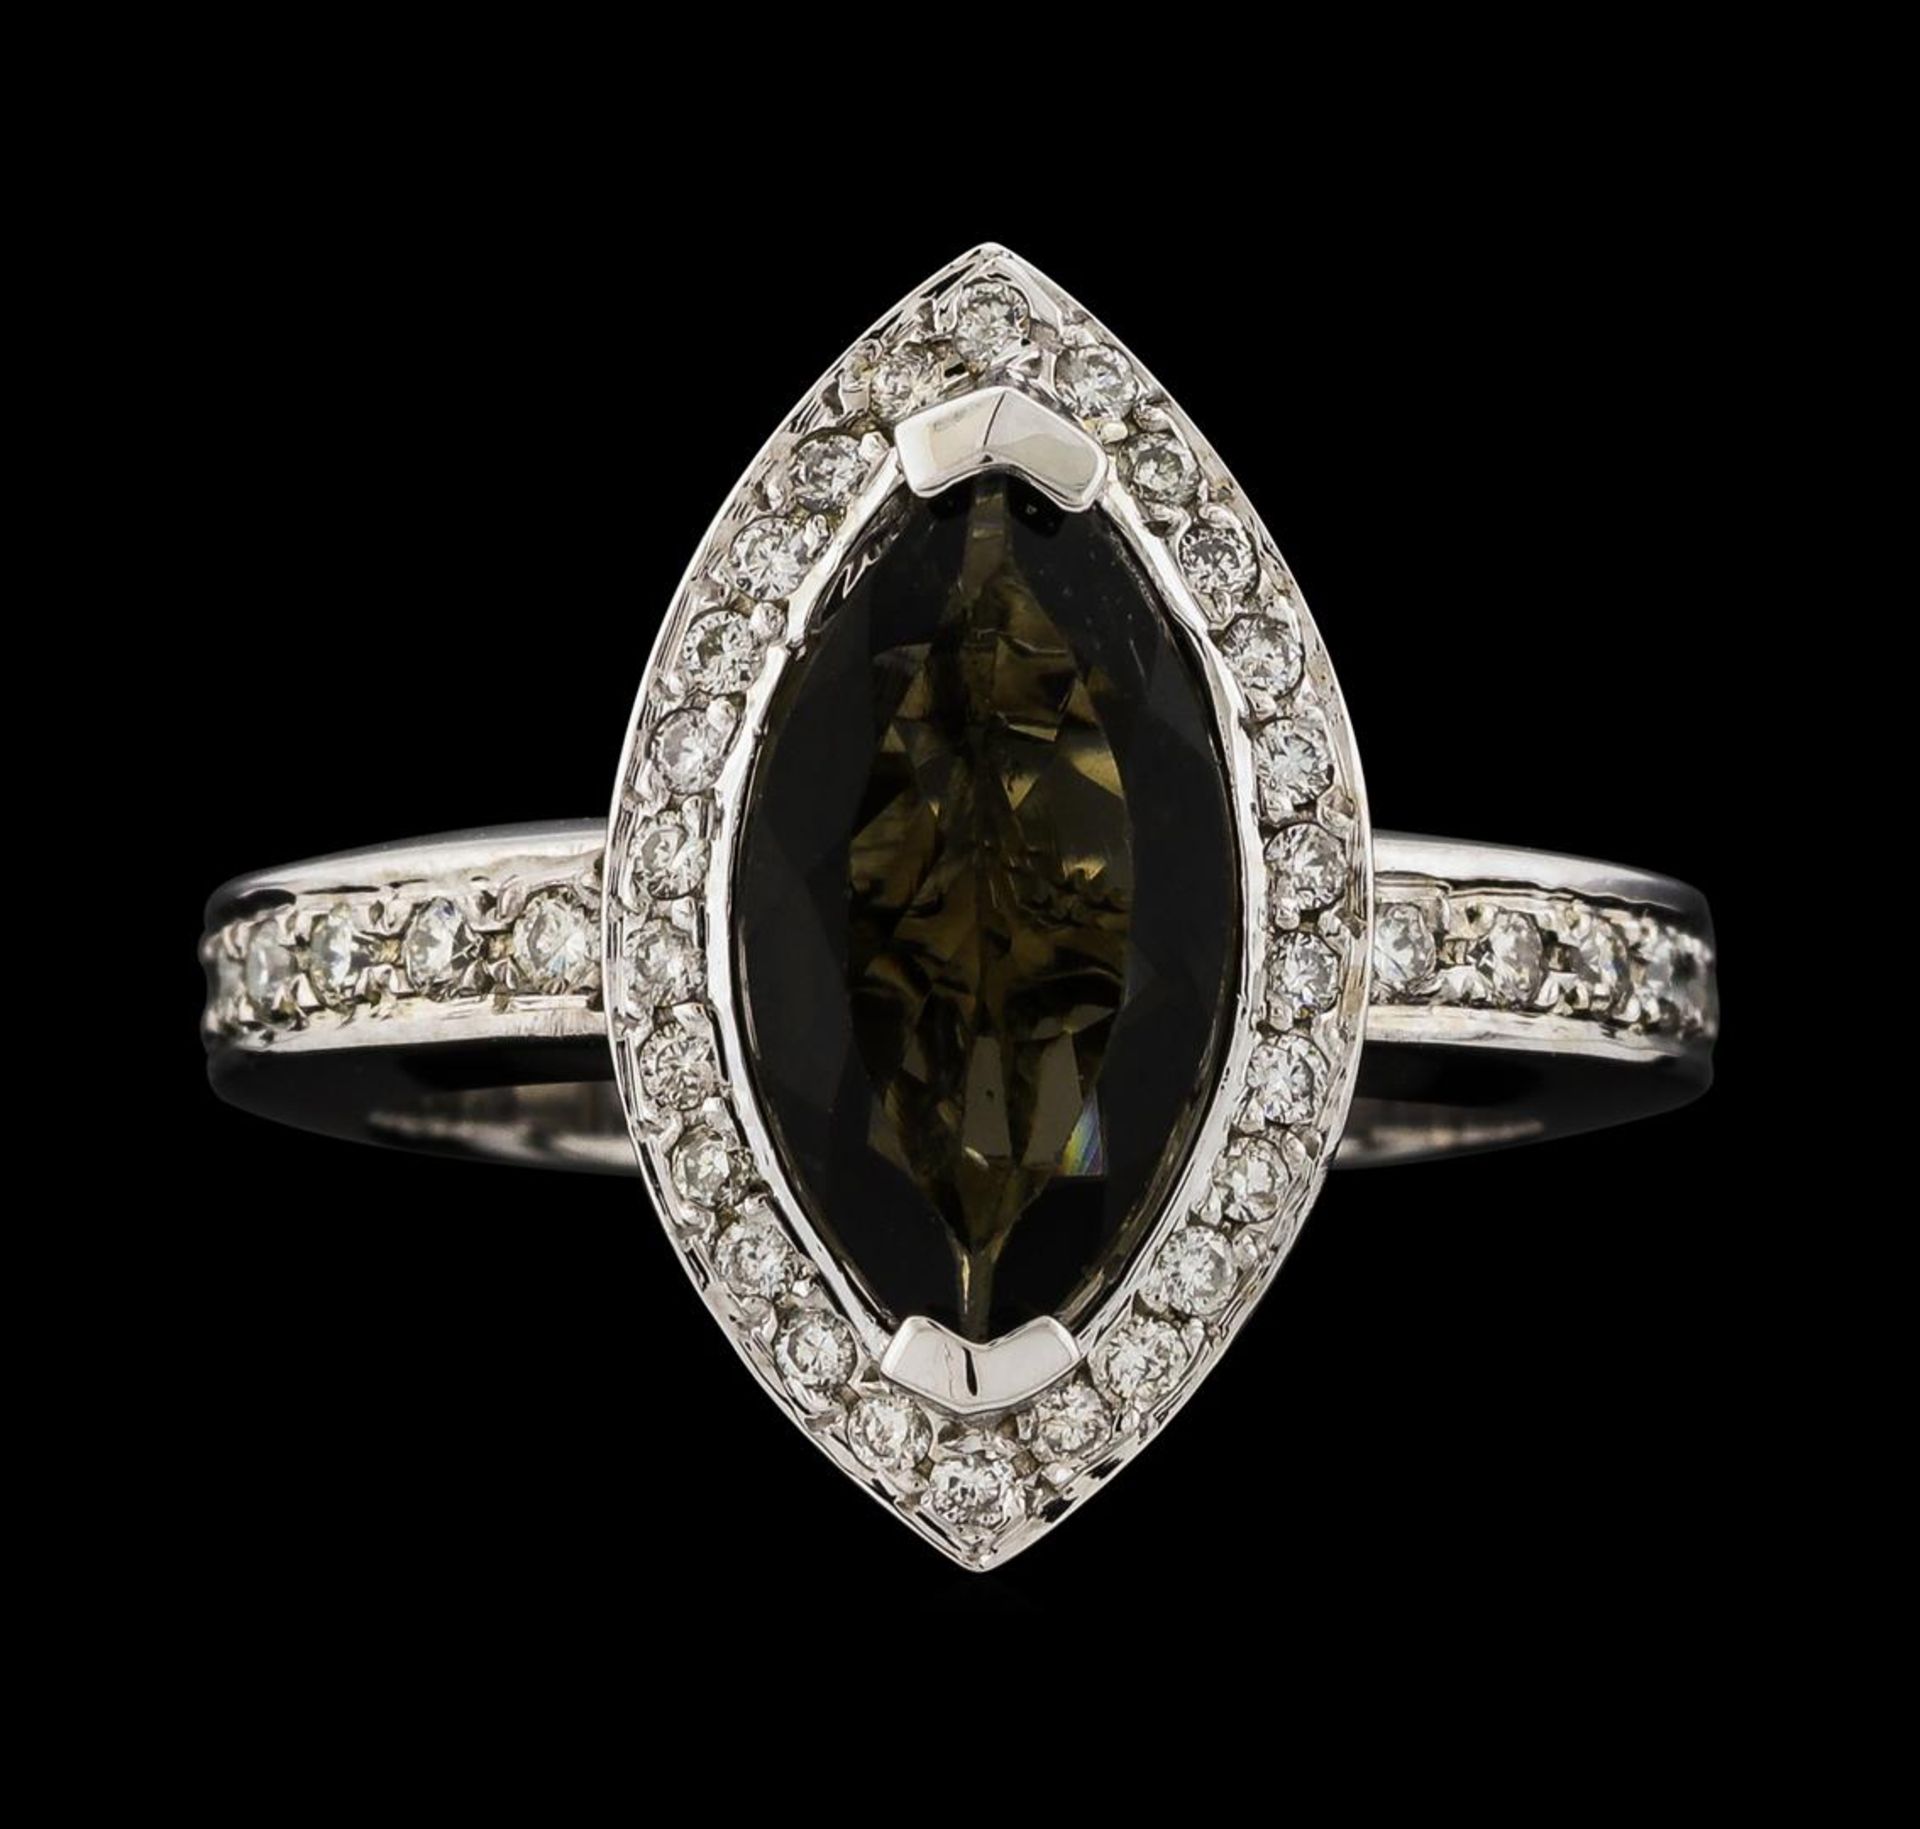 1.61 ctw Tourmaline and Diamond Ring - 14KT White Gold - Image 2 of 4